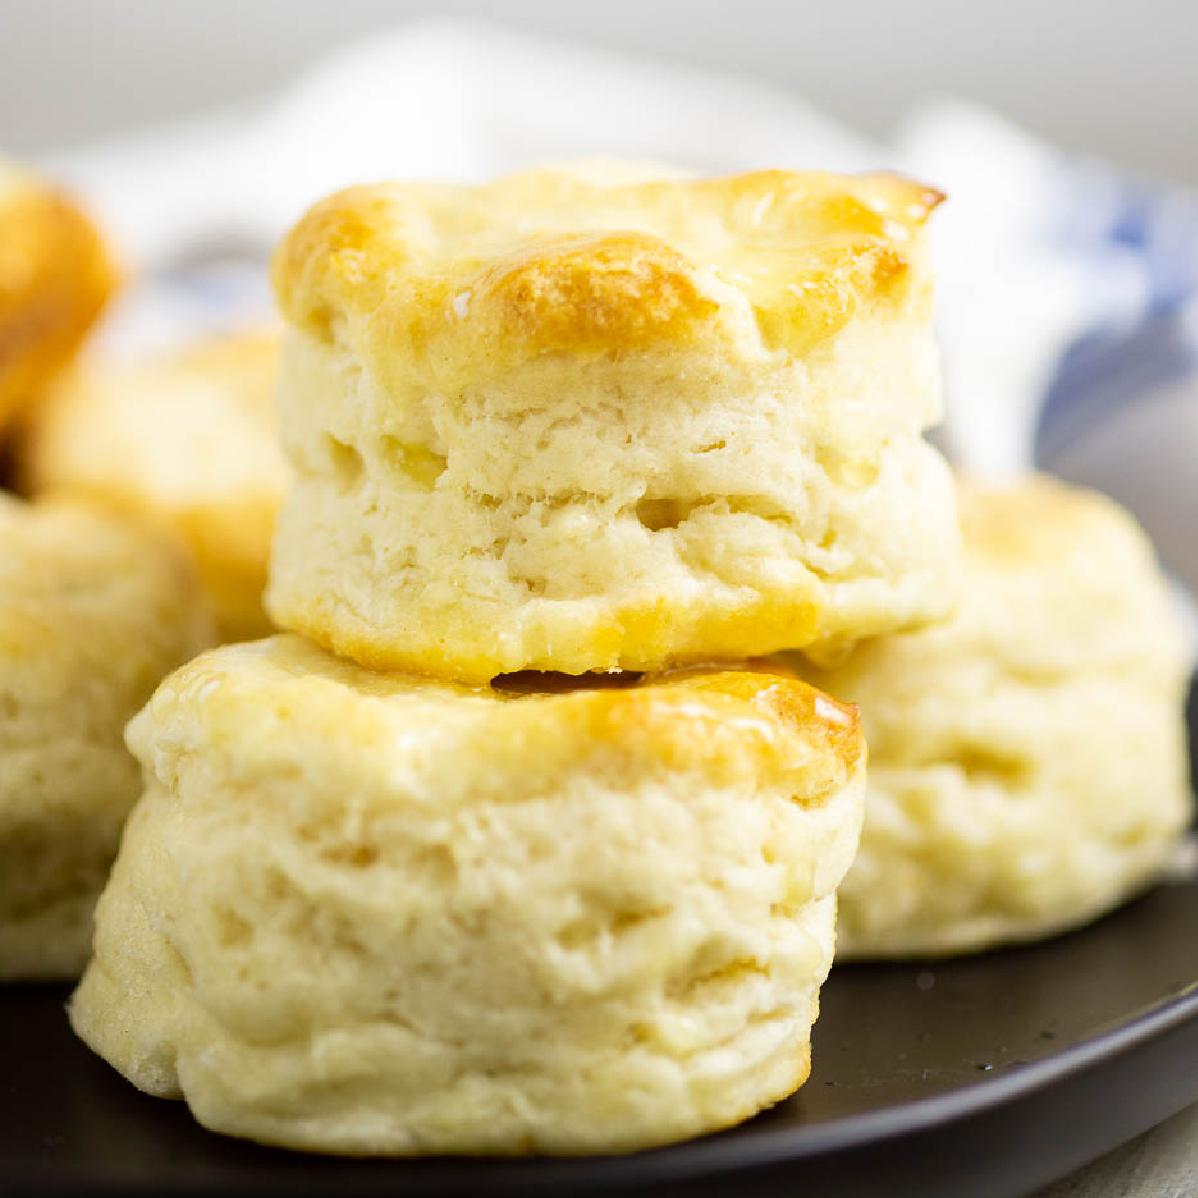  You can almost smell the fluffy goodness of these biscuits through the picture.